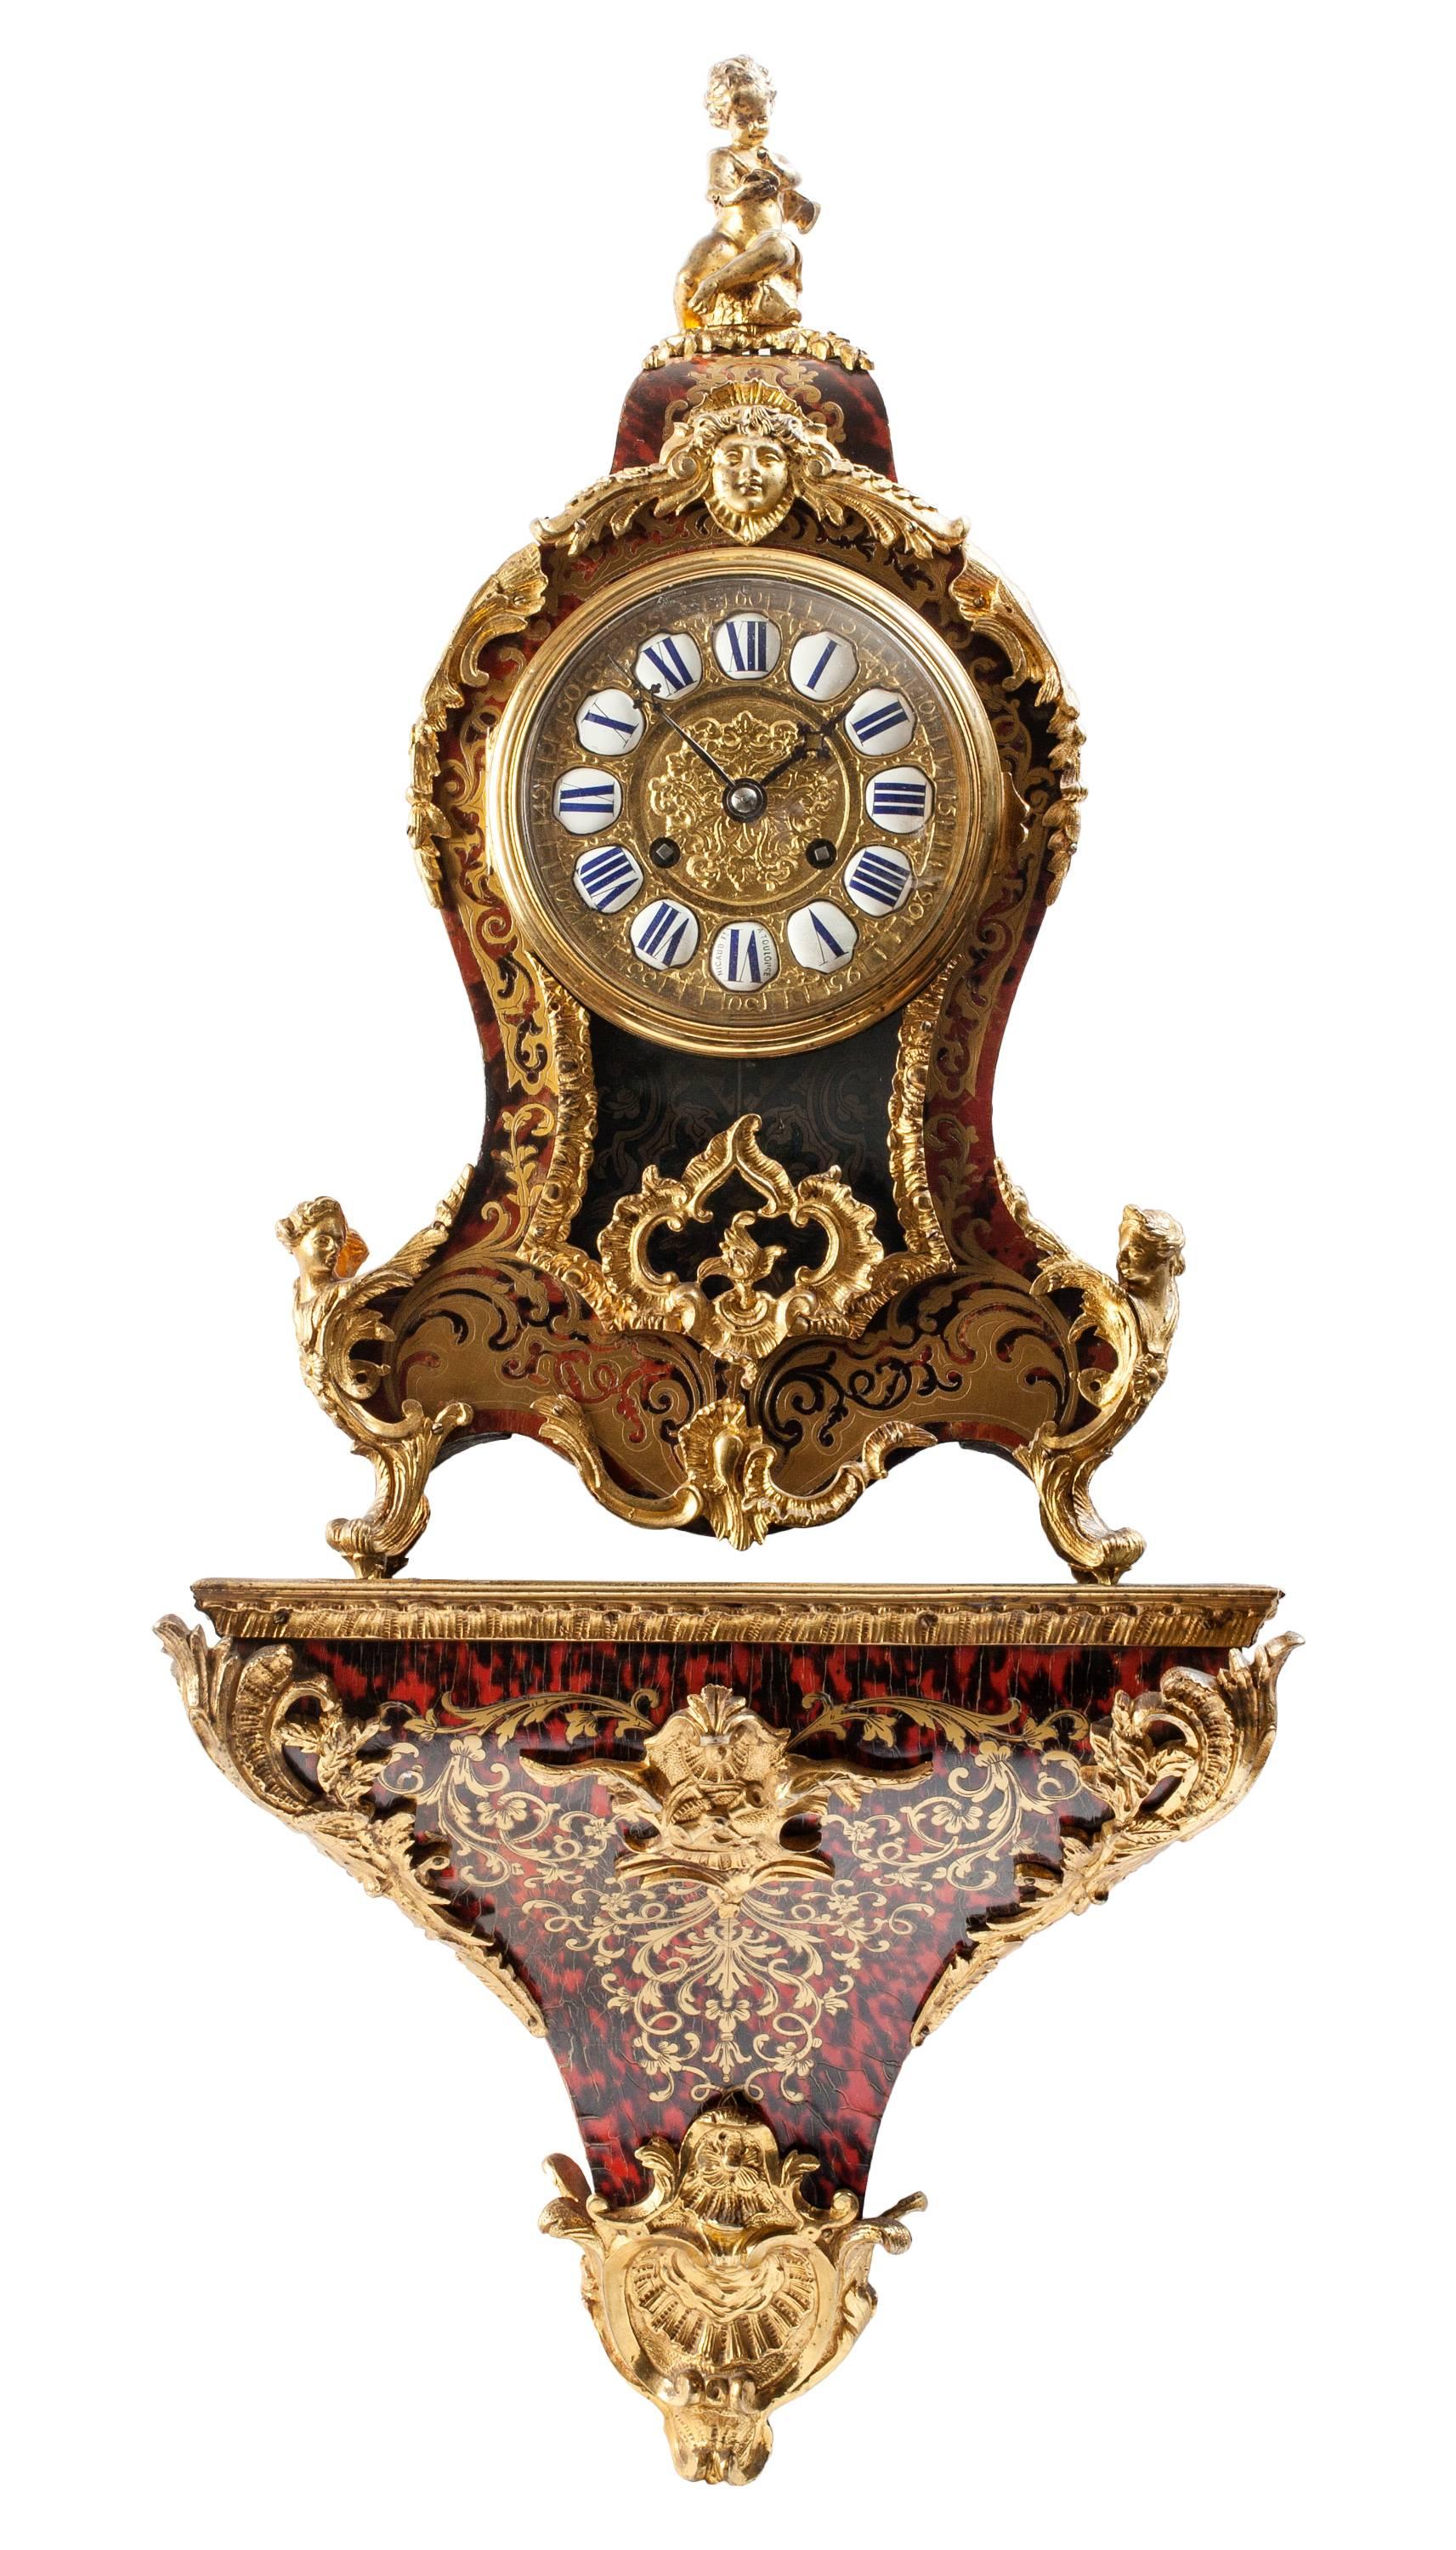 Opulent Louis XV style Boulle mantel clock, with matching shelf. Extravagantly decorated in red tortoiseshell and ormolu, with brass gilt face and enamel numbers, marked 